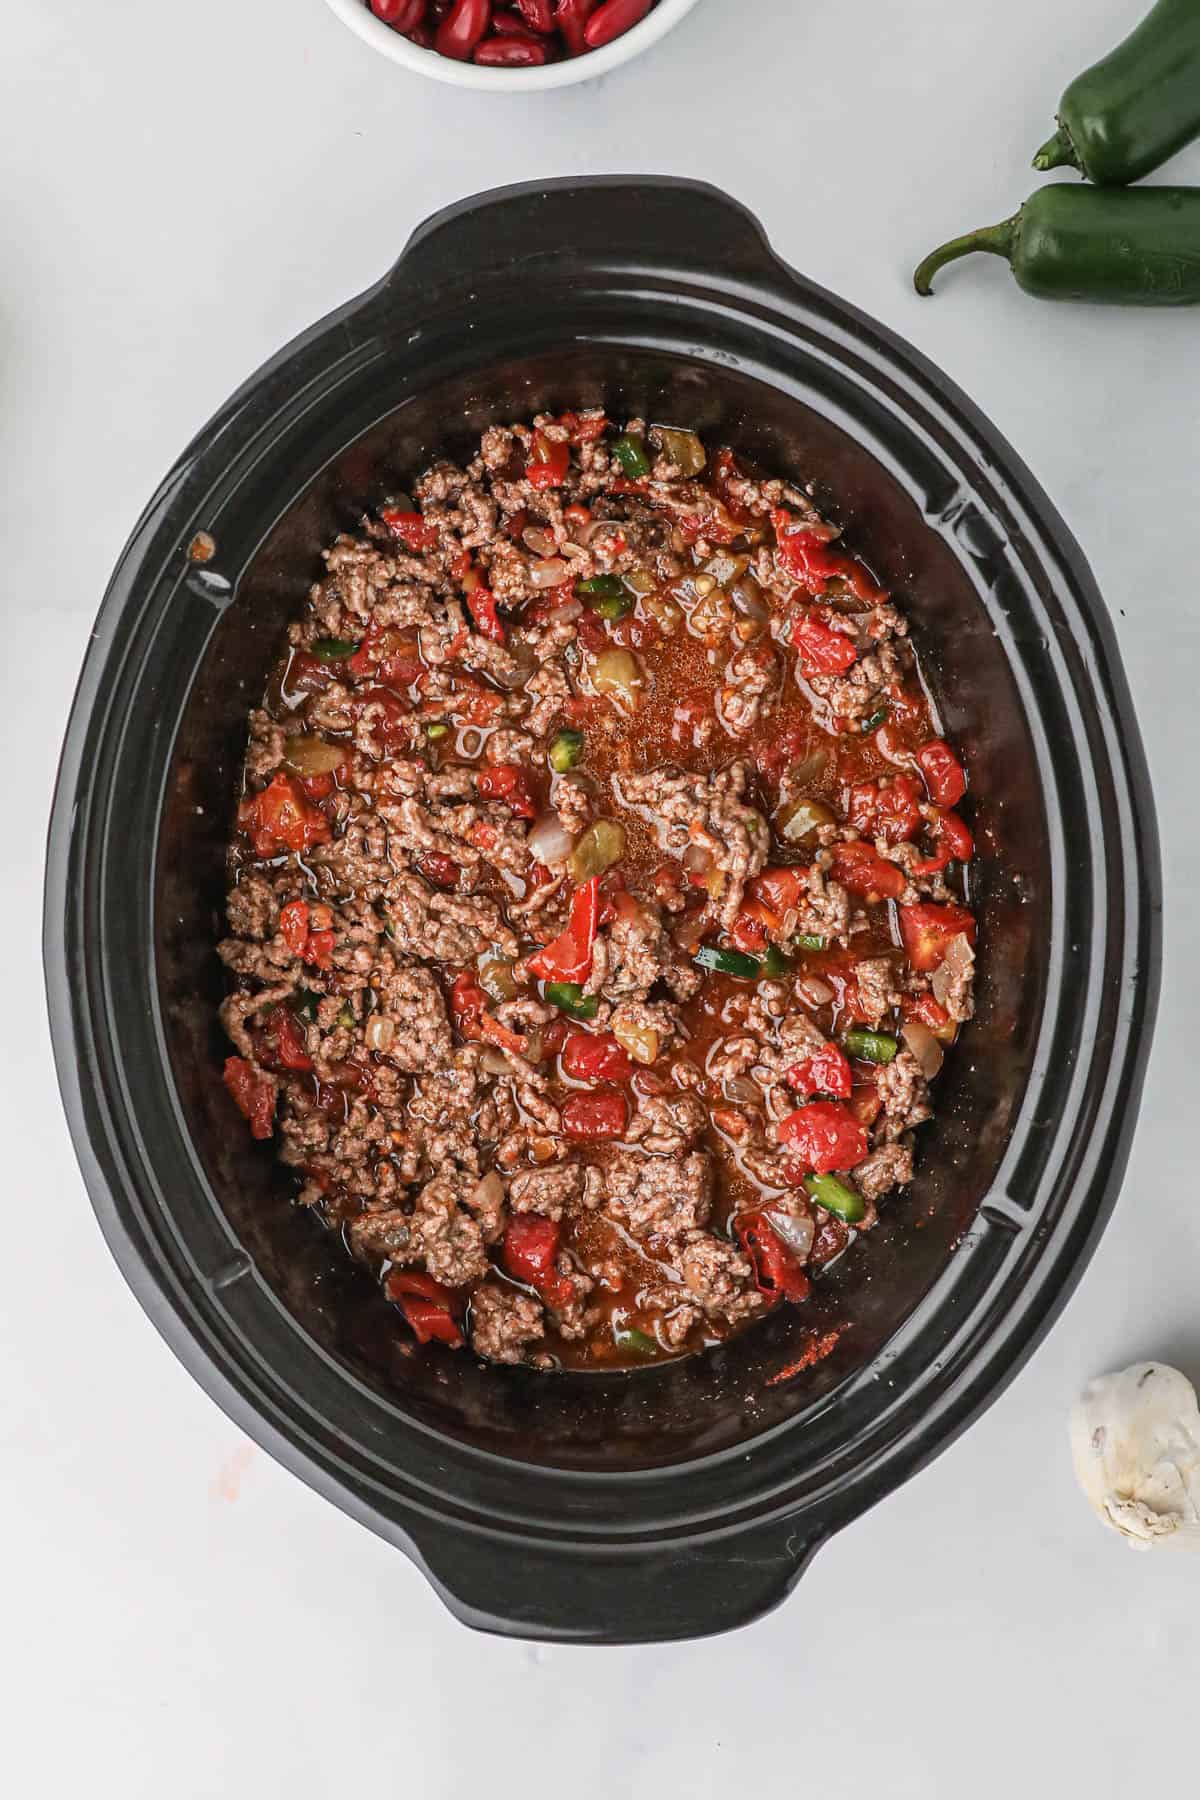 Browned ground beef and tomatoes in a slow cooker.